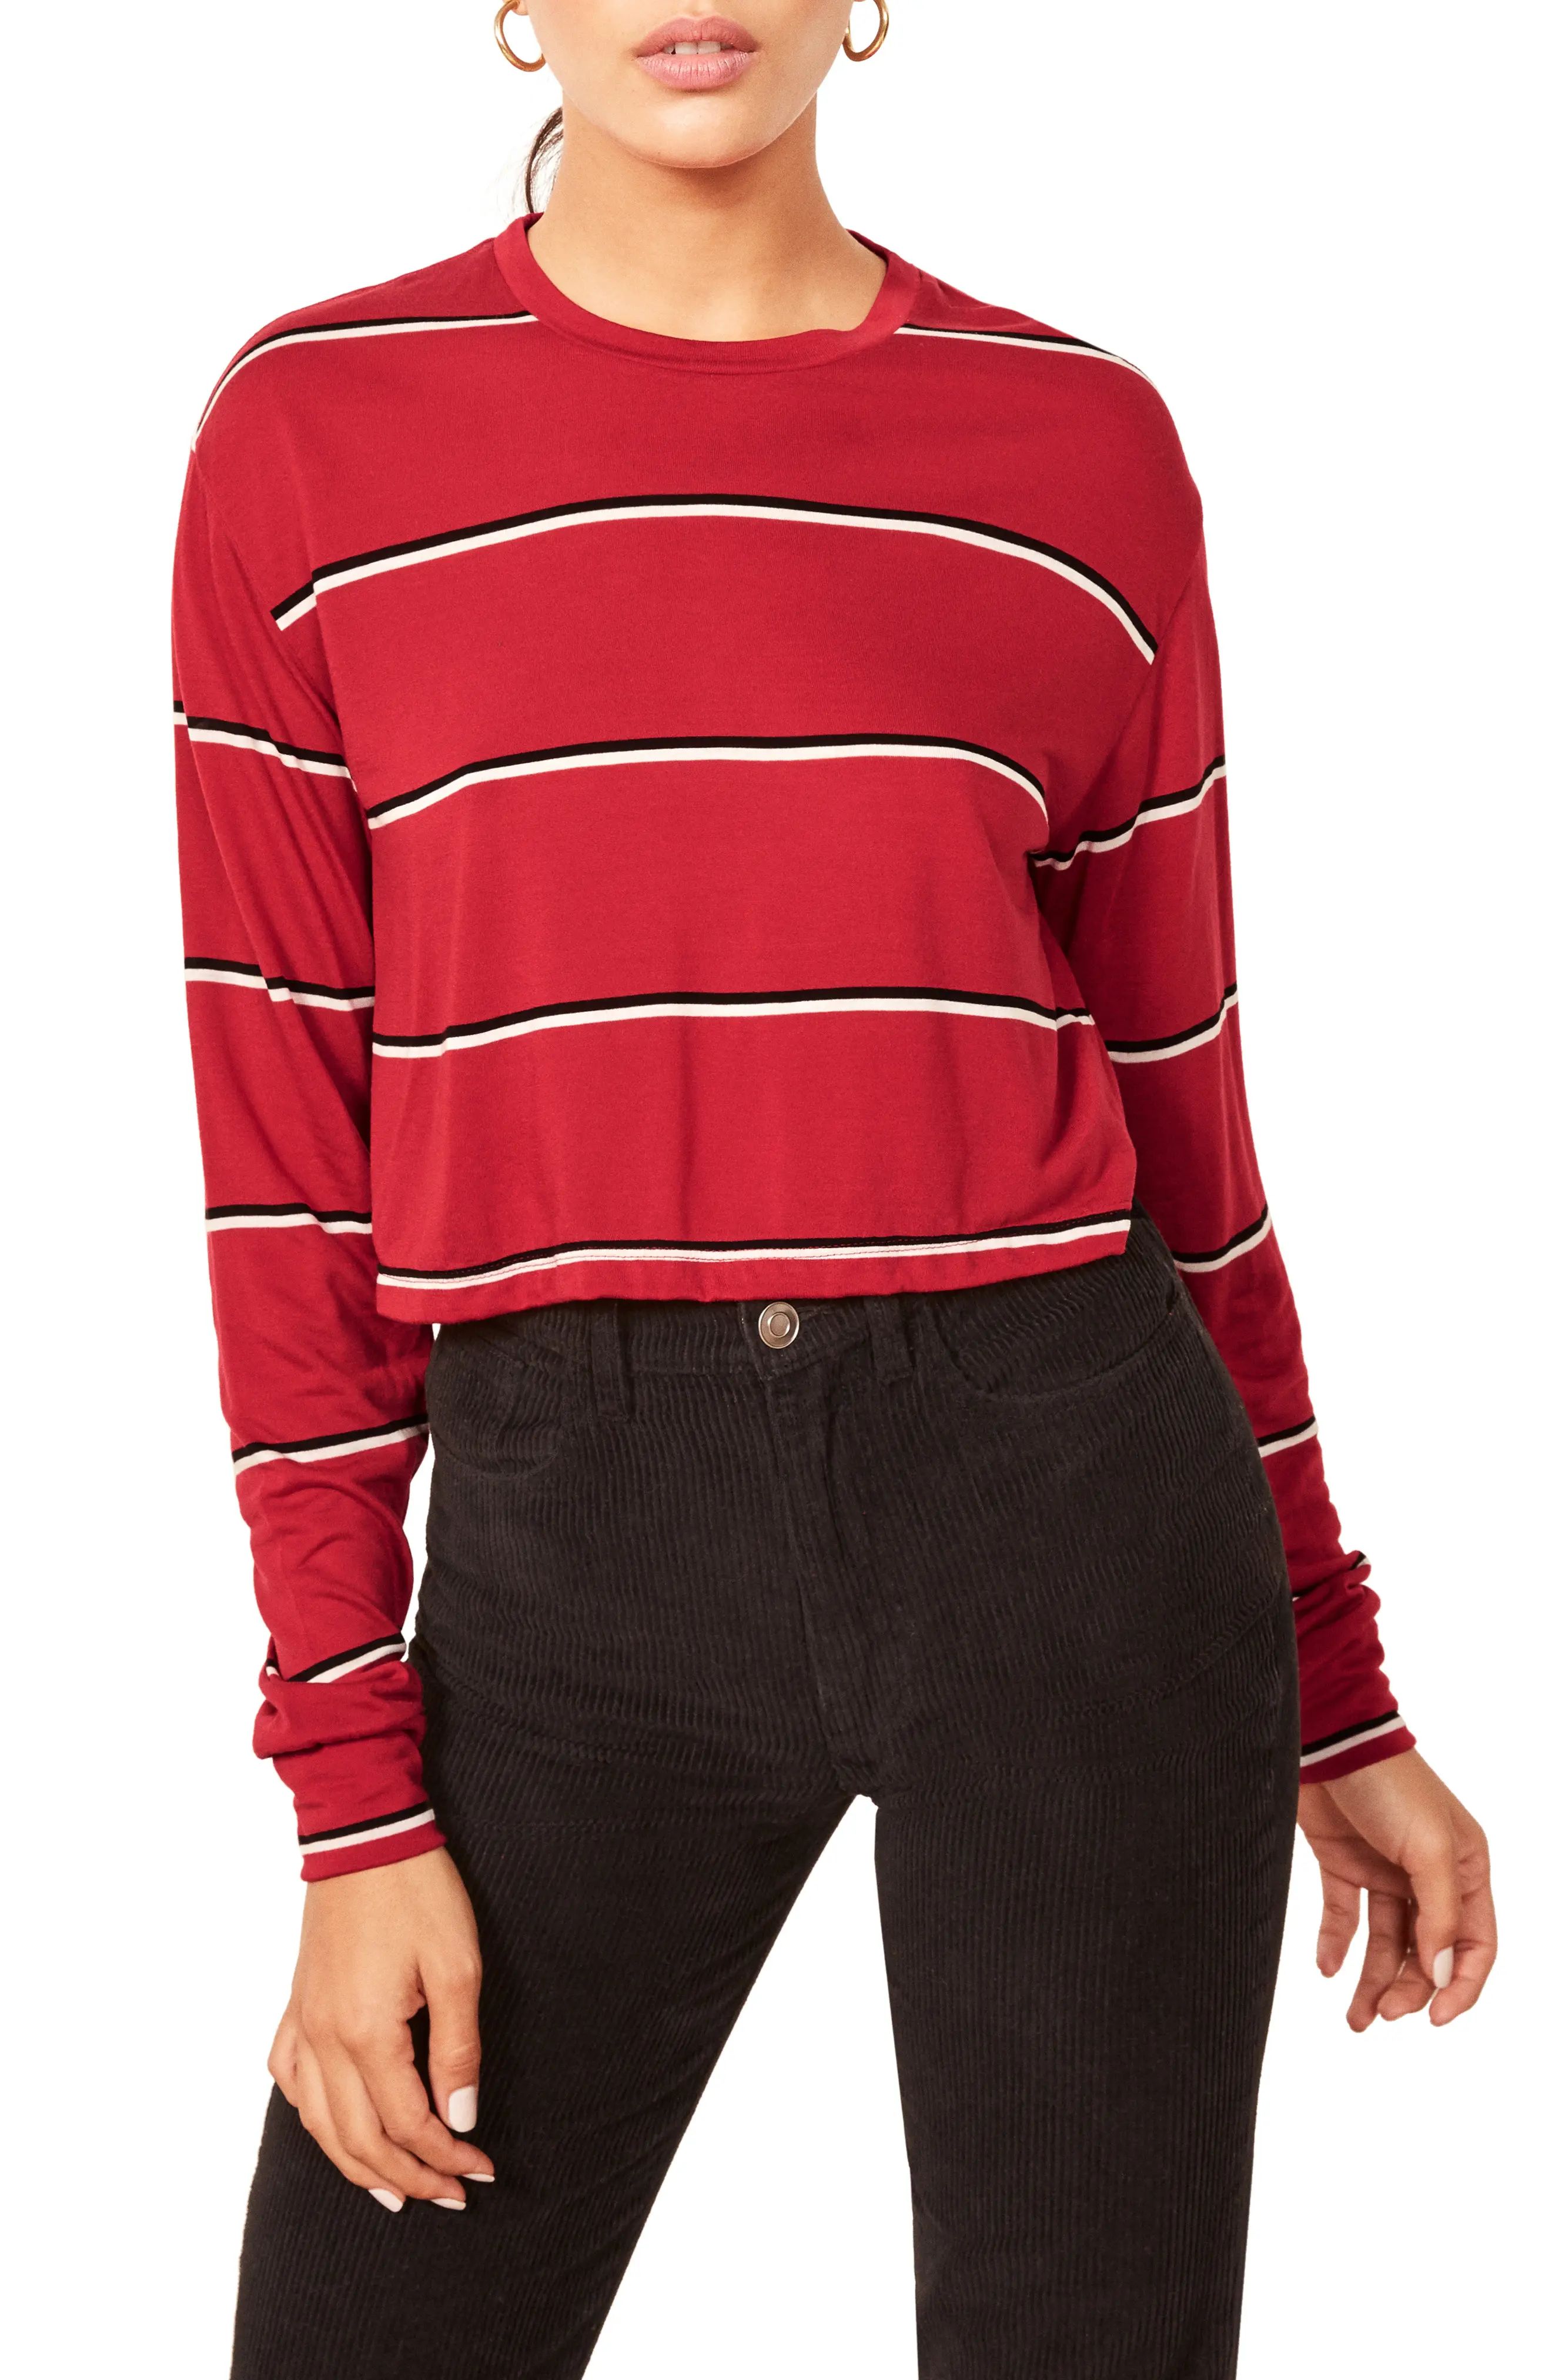 Women's Reformation Chloe Stripe Top, Size X-Small - Red | Nordstrom